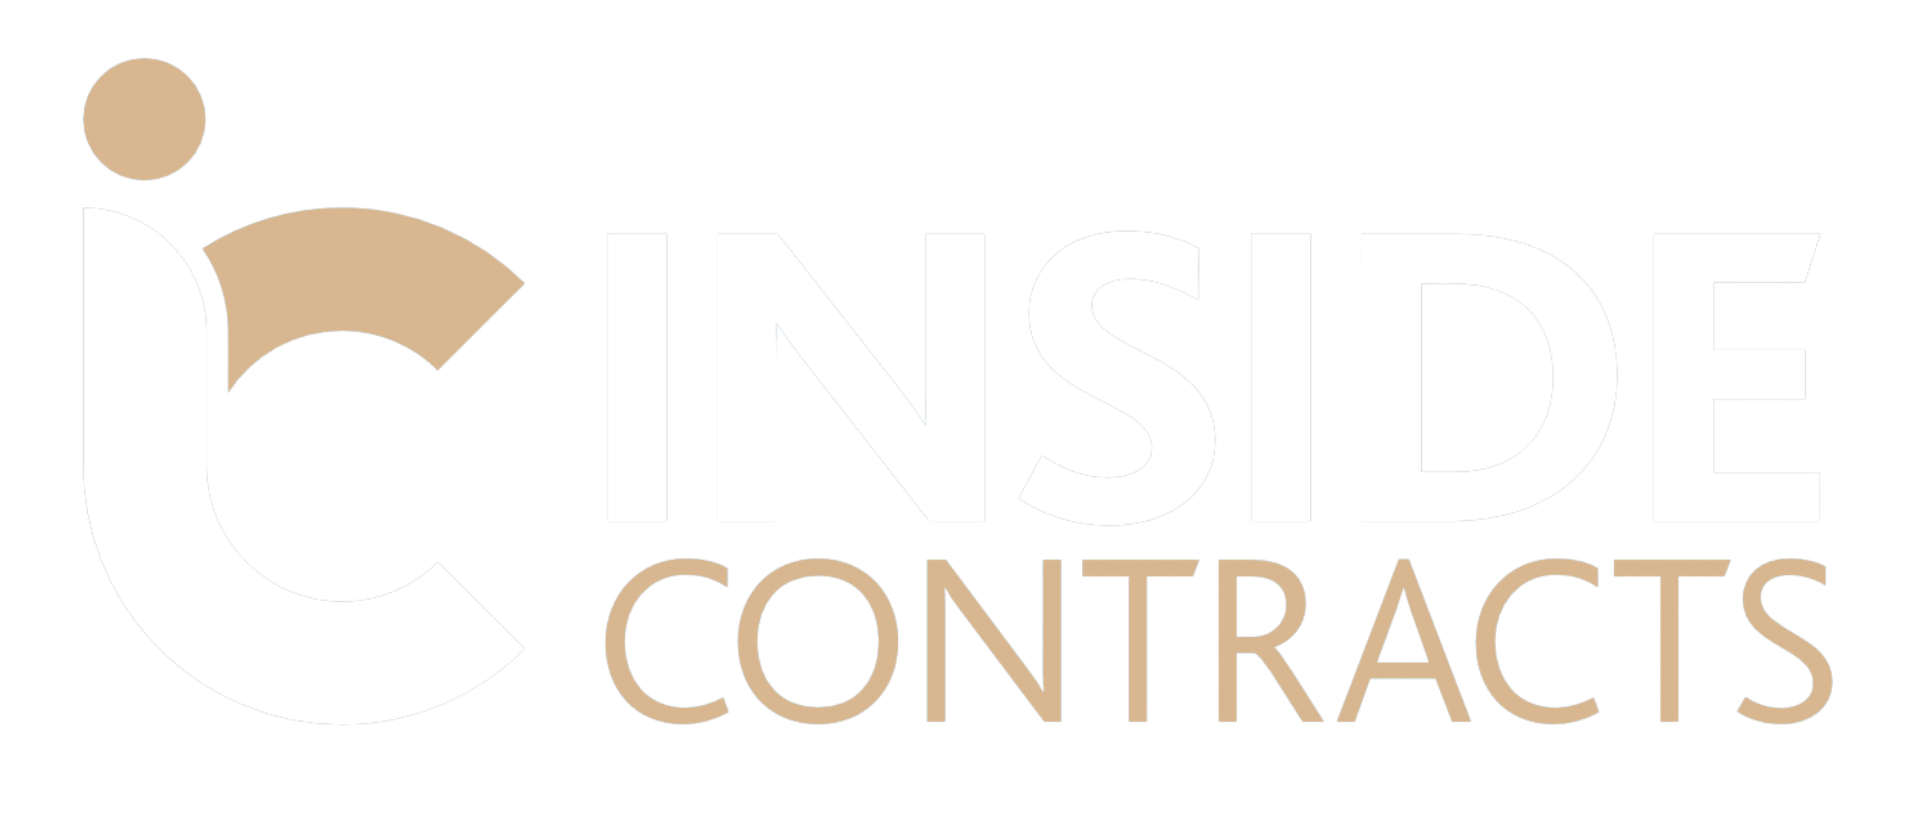 Inside Contracts Logo